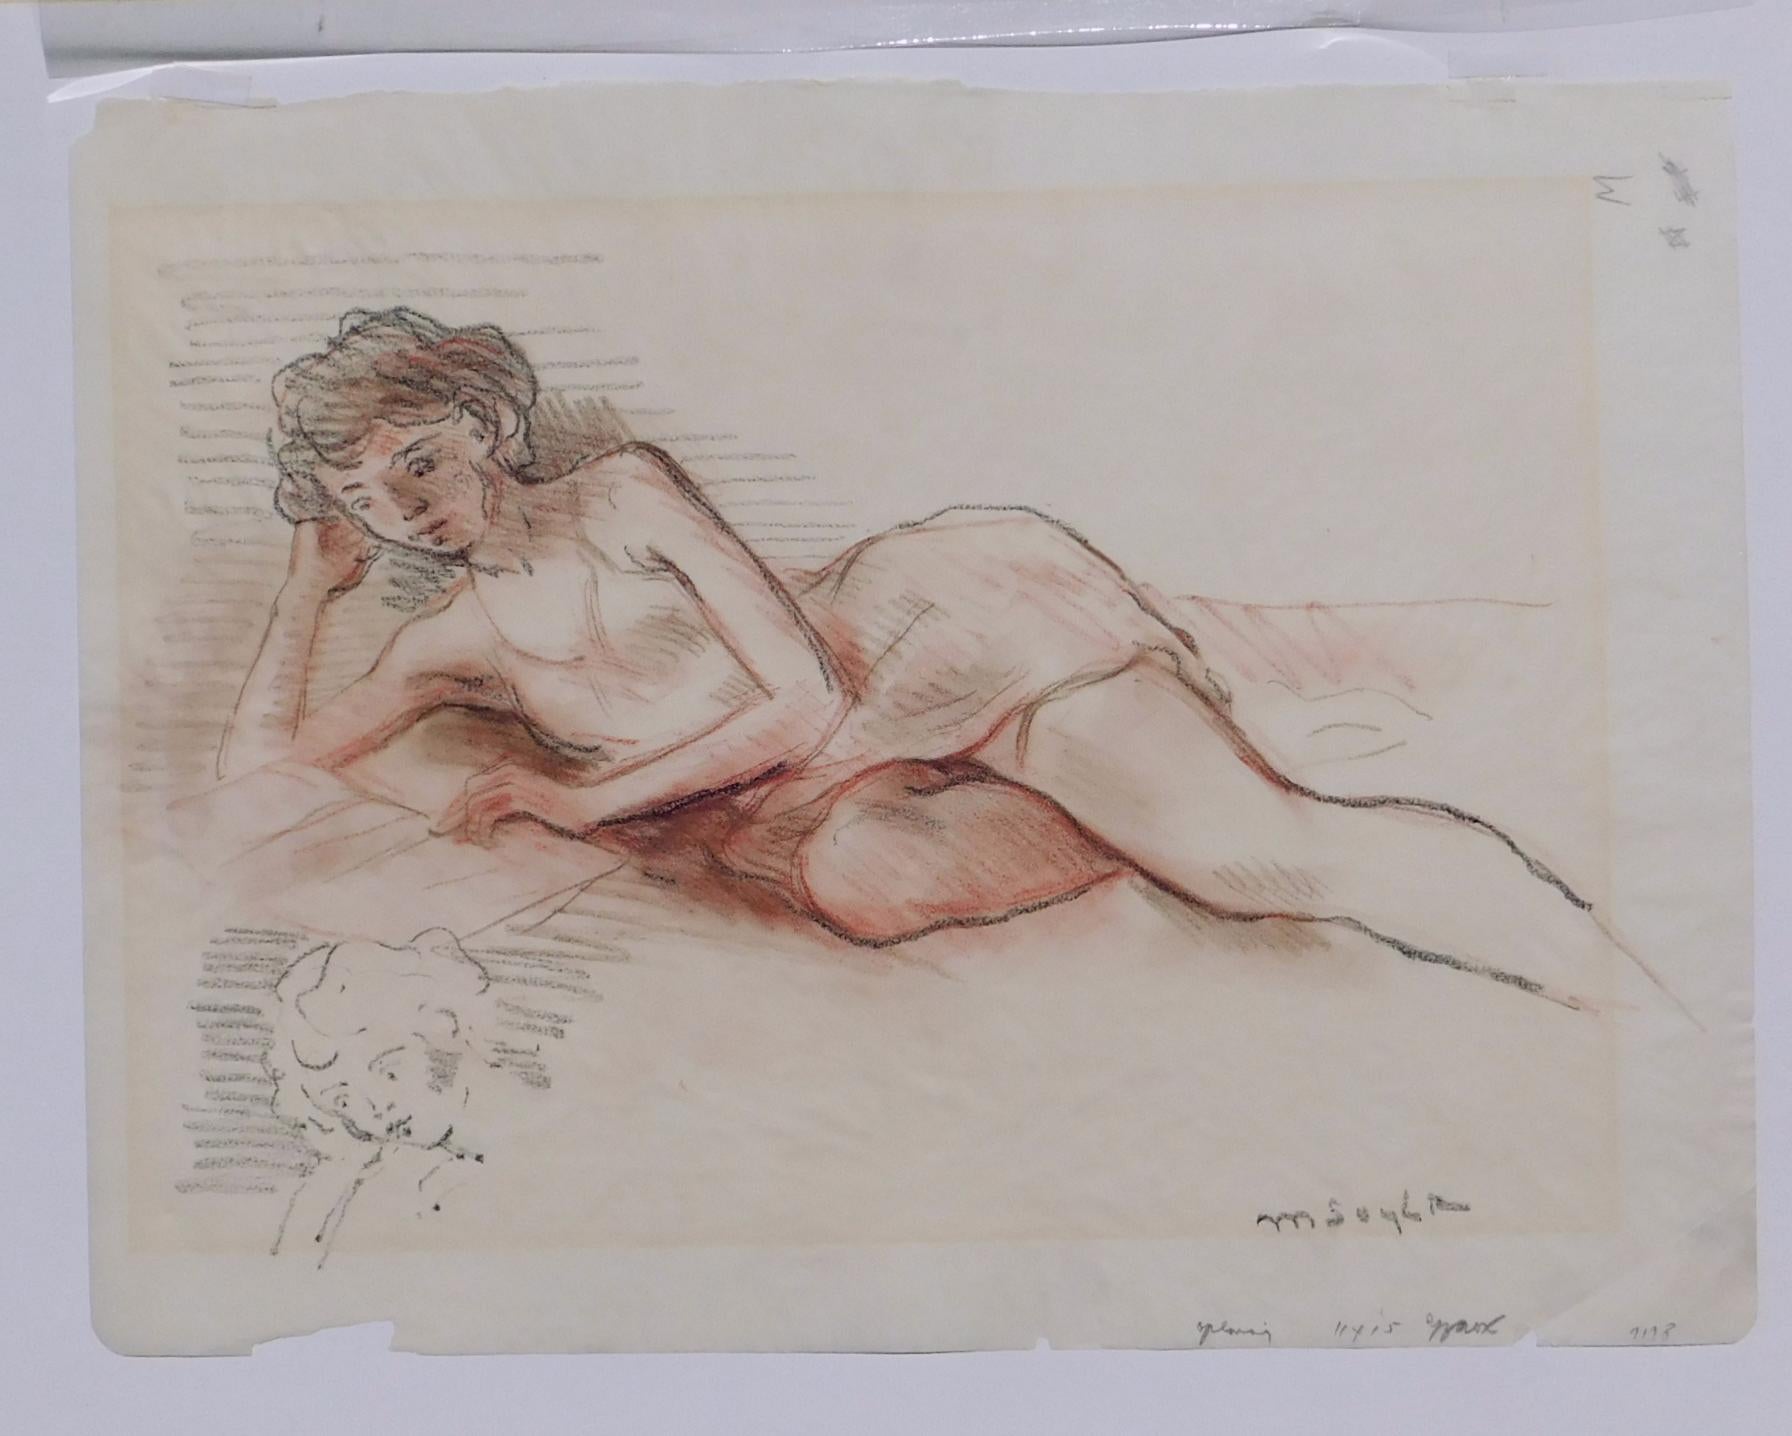 Original drawing by Raphael Soyer’s twin brother Moses (1899-1974) of a resting woman.
The medium is conte crayon and graphite and the work is signed by the artist lower right.
It is matted and unframed and in excellent condition. Image size: 11 x